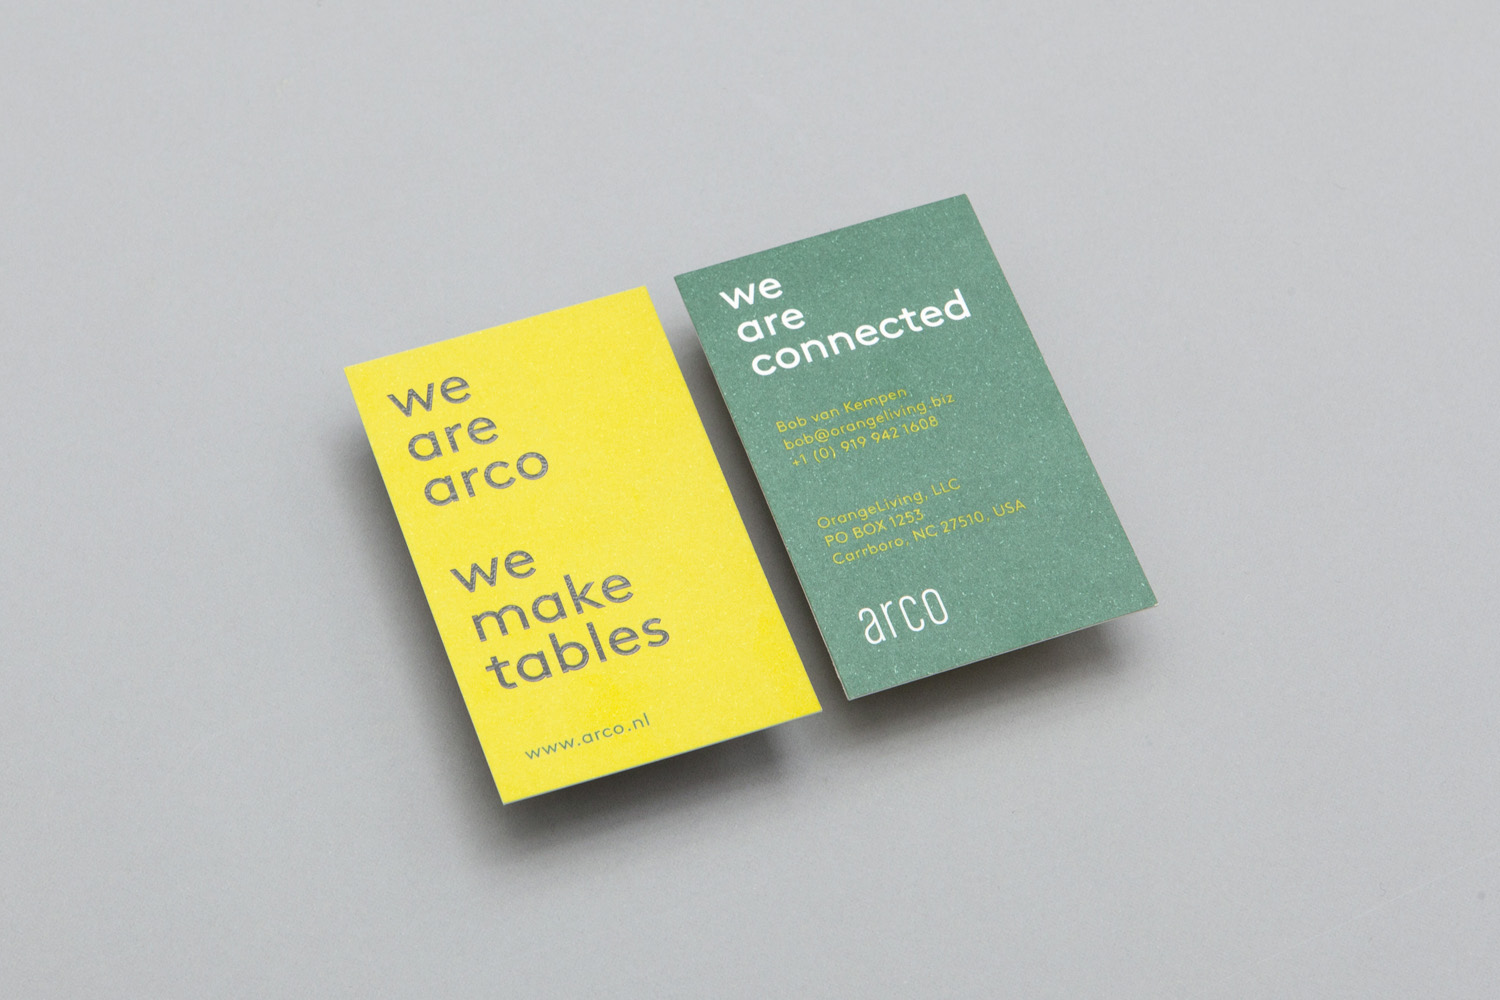 Business cards for Dutch contemporary furniture business Arco designed by Arco. These feature the font Brown, a green and yellow colour palette and a black thermographic print finish.